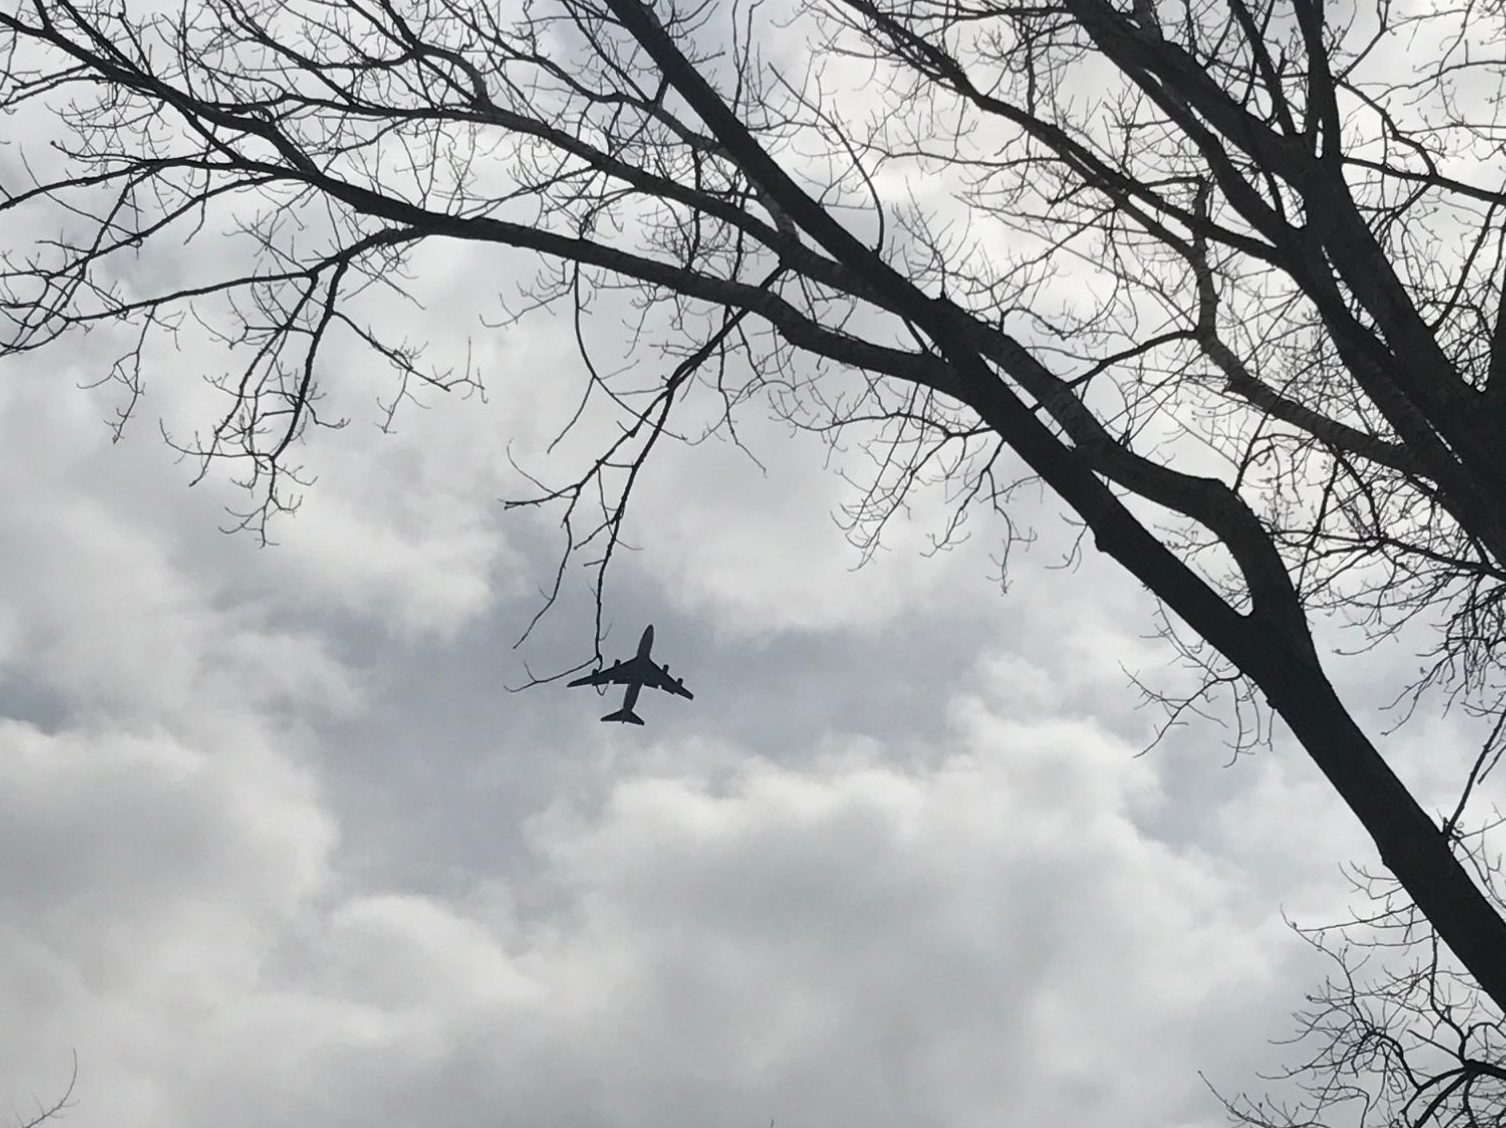 Large airplane with four engines flying above with tree limbs in the foreground.